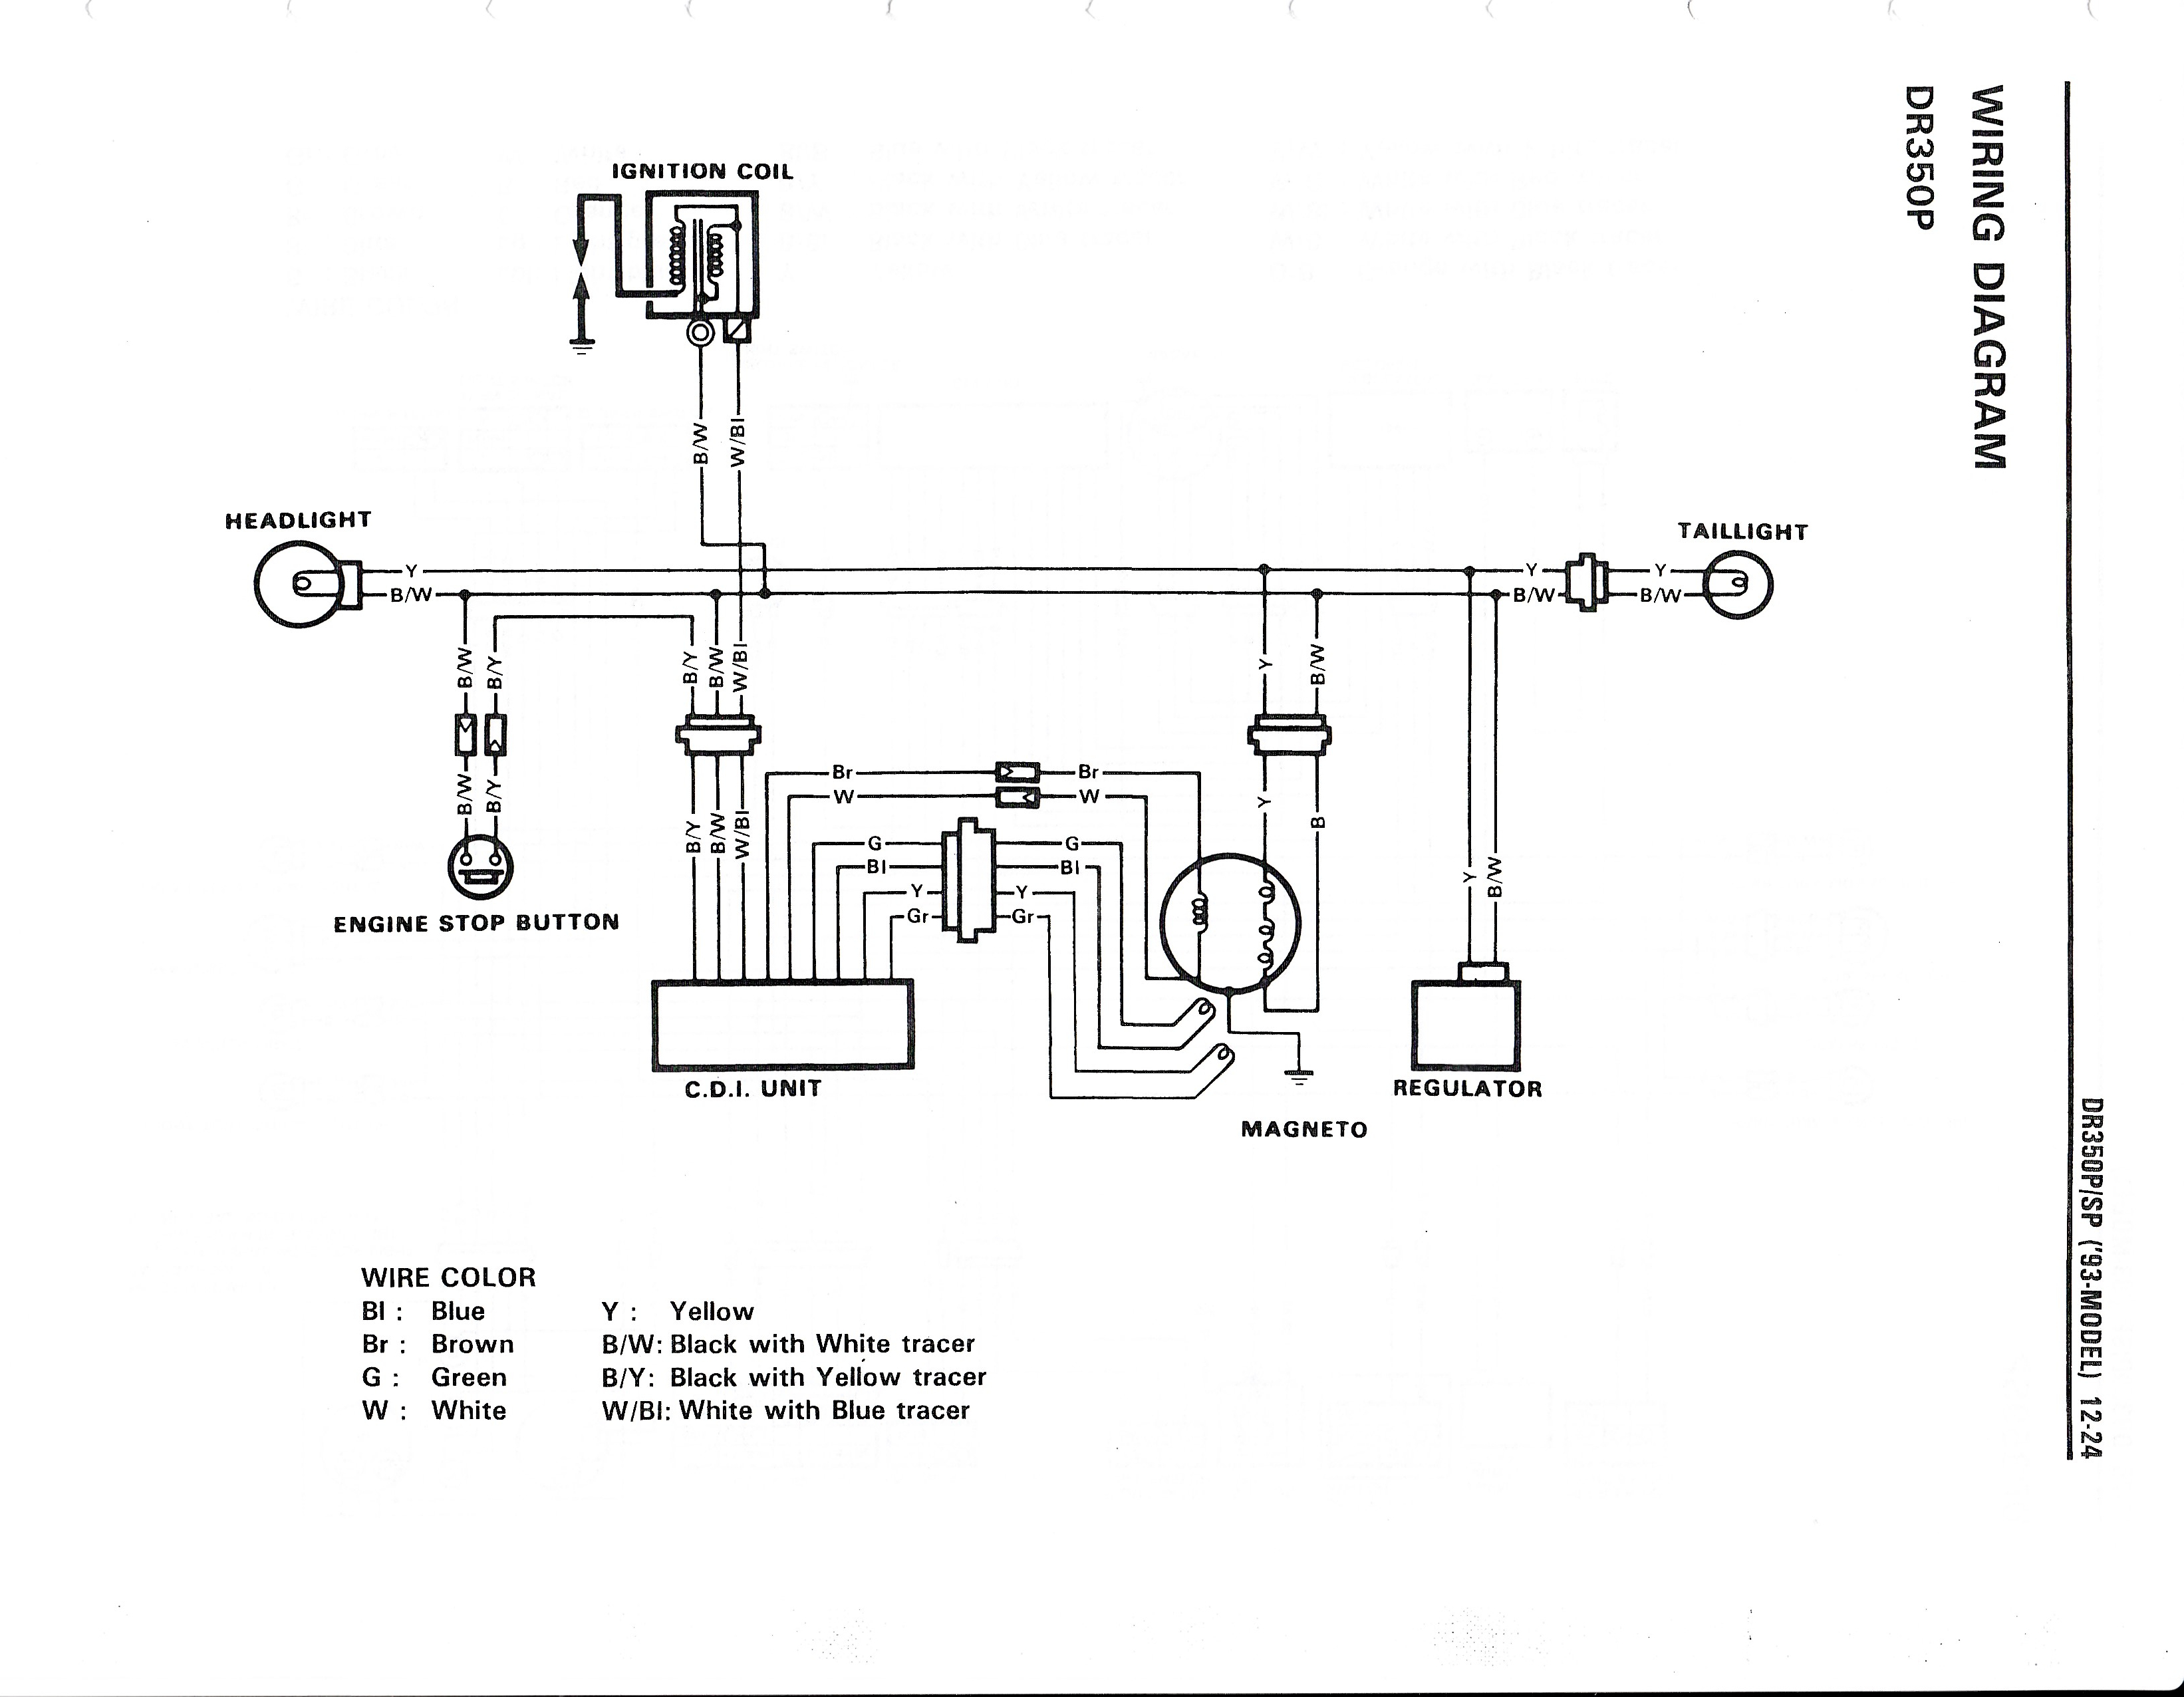 Wiring diagram for the DR350 (1993 and later models) - Suzuki Parts